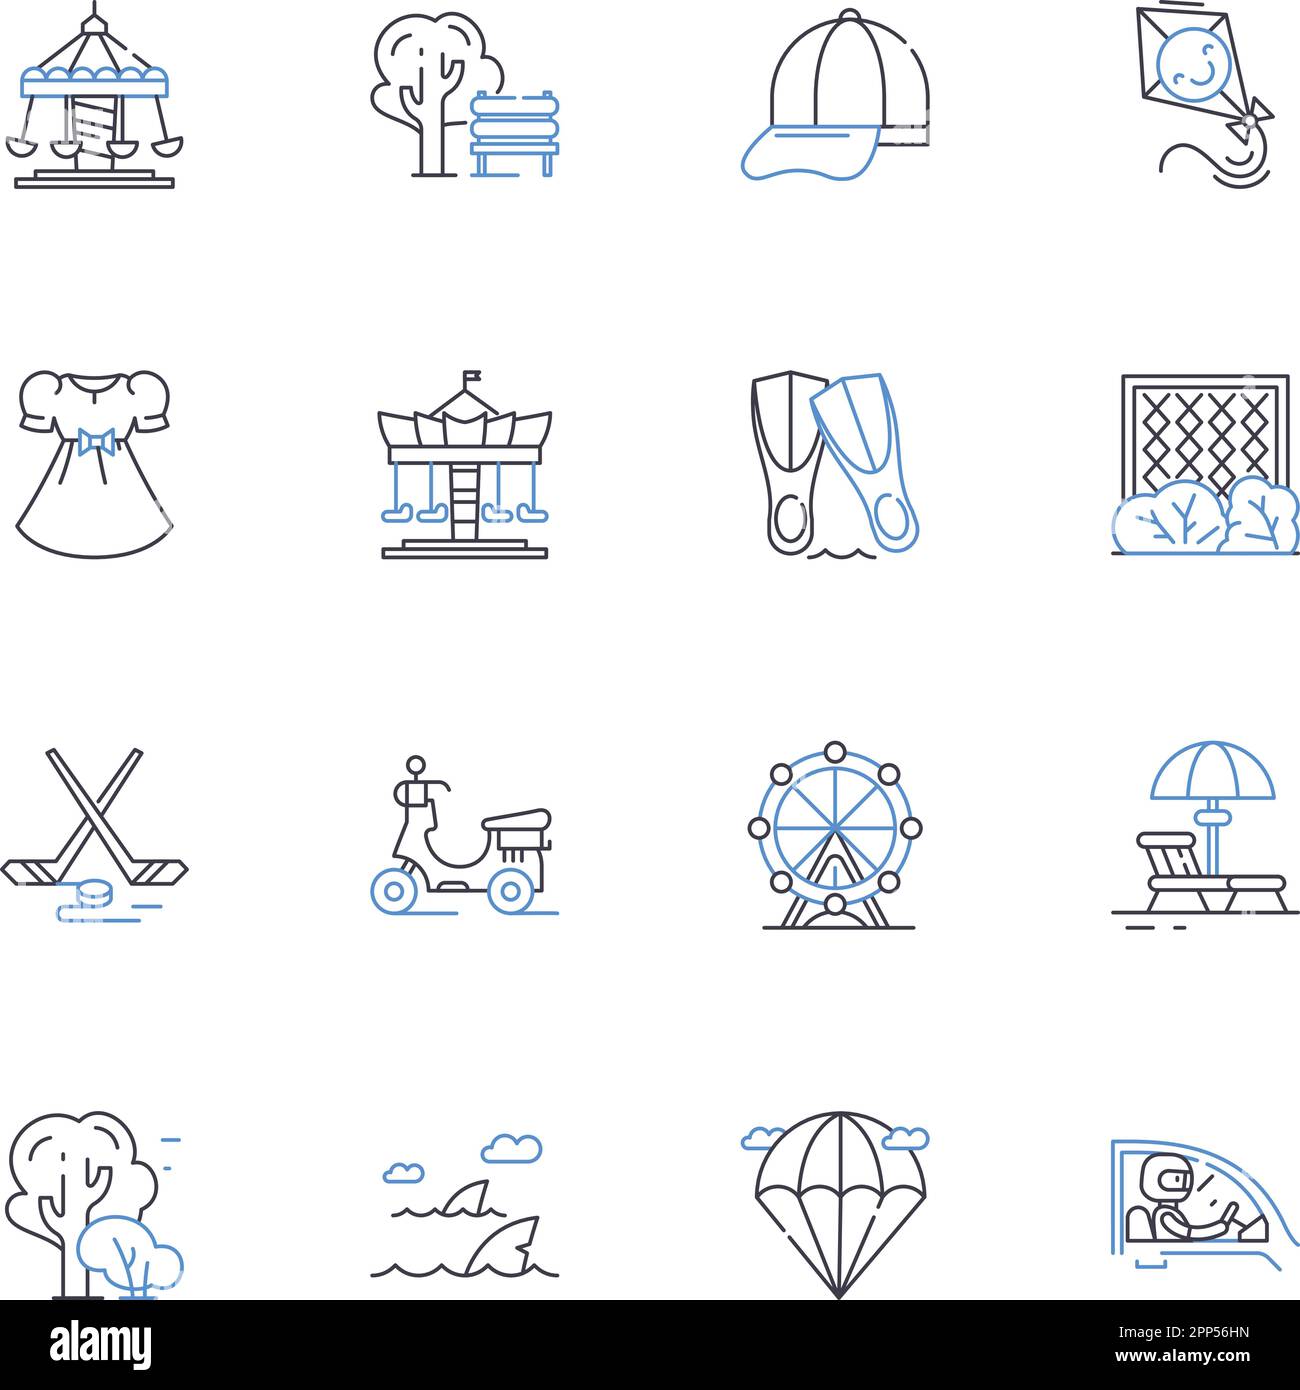 Paddleboarding line icons collection. Balance, Floating, Paddle, Relaxing, Glide, Fun, Adventure vector and linear illustration. Zen,Serene,Exercise Stock Vector